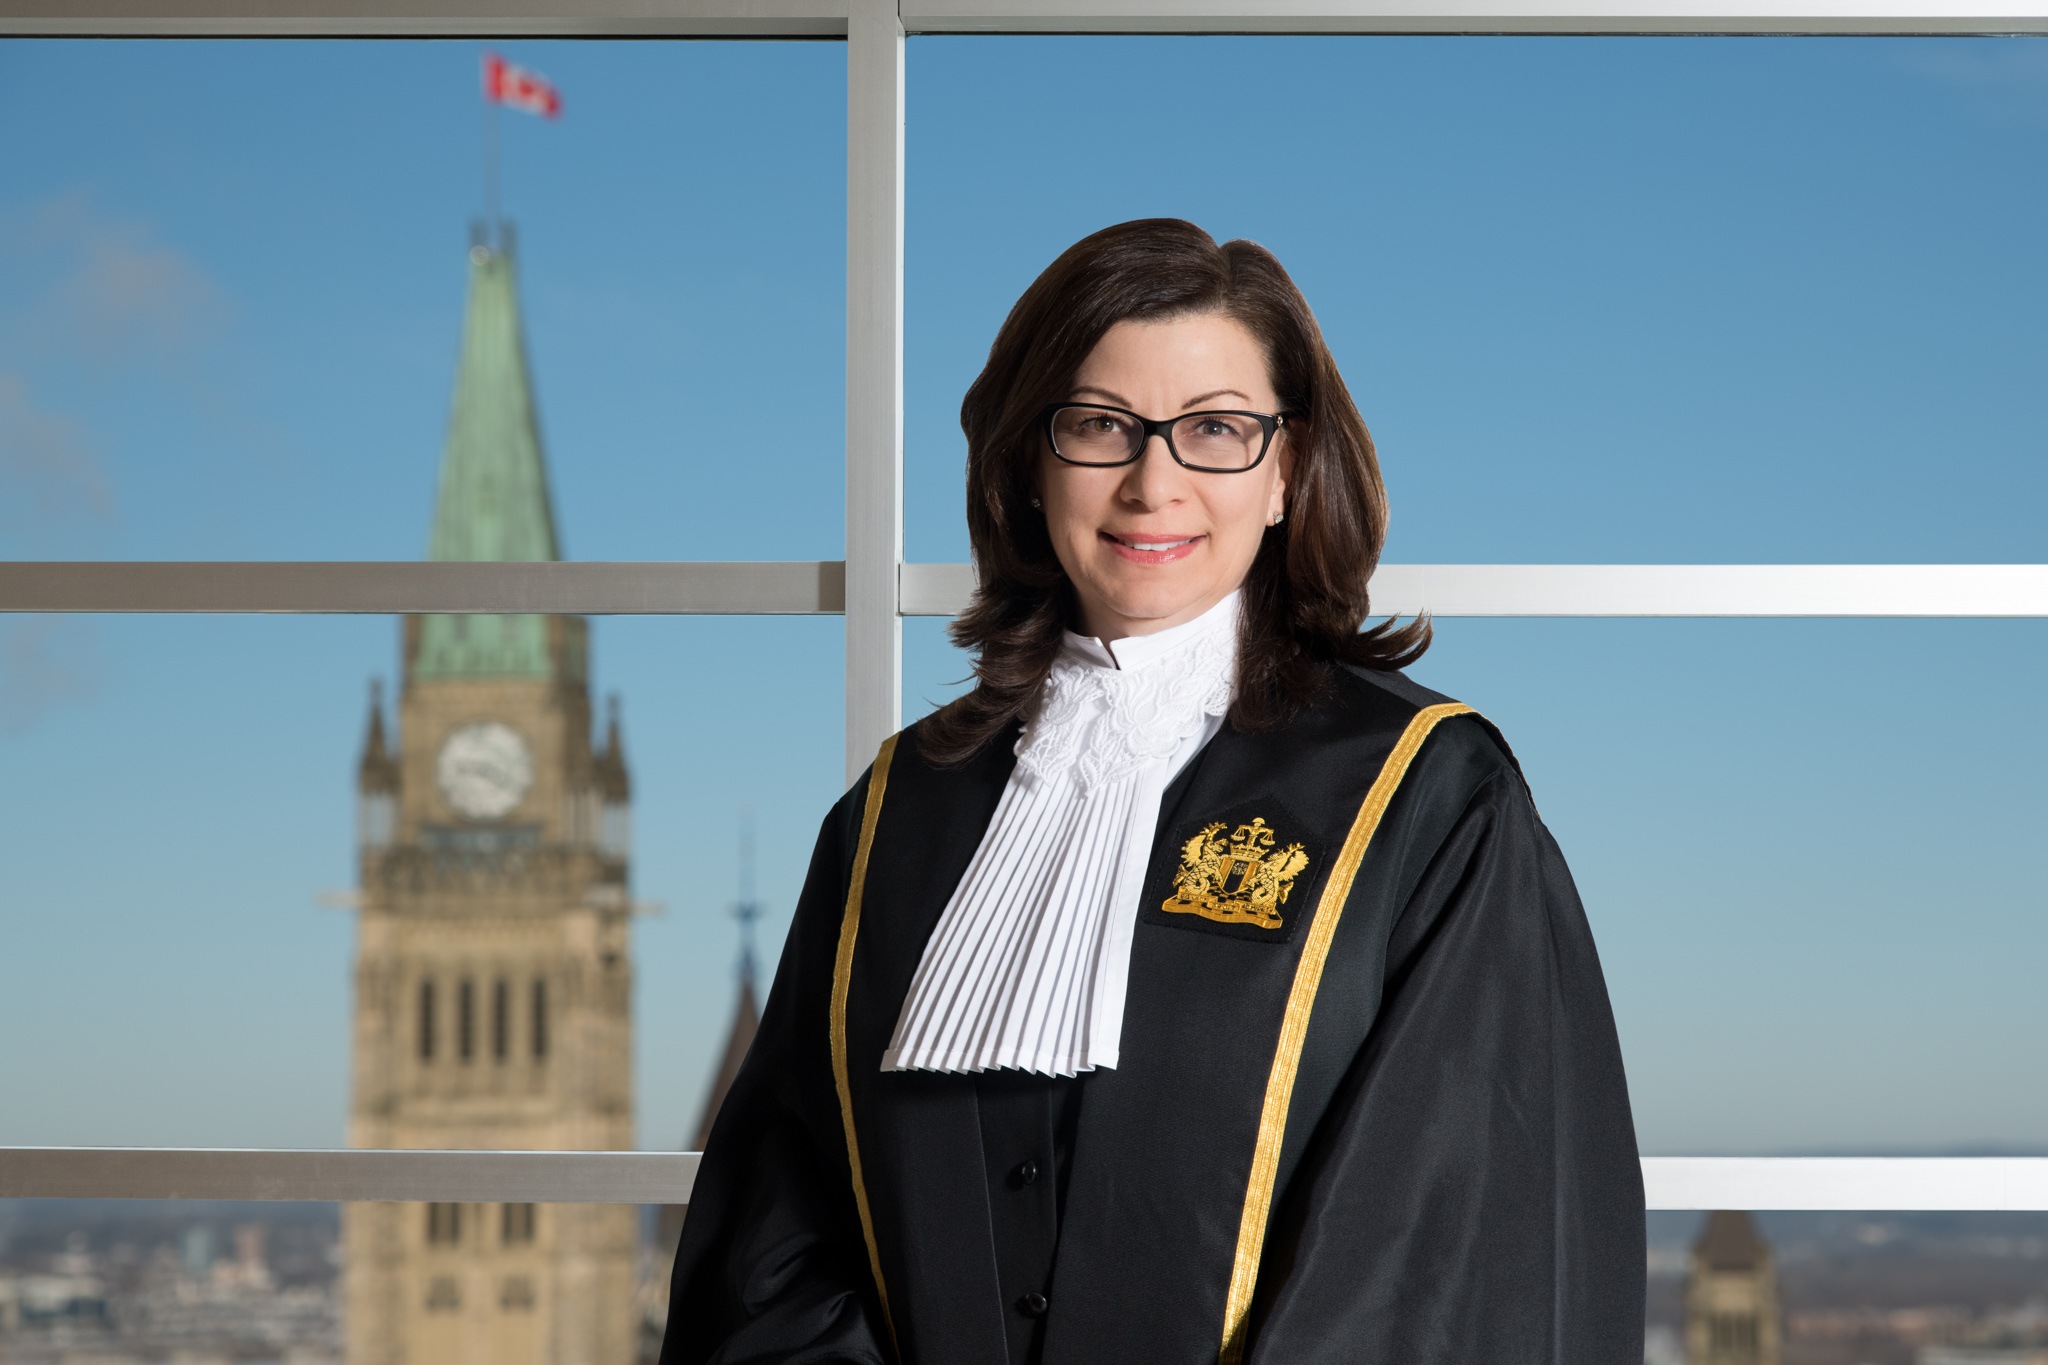 The Honourable Martine St-Louis